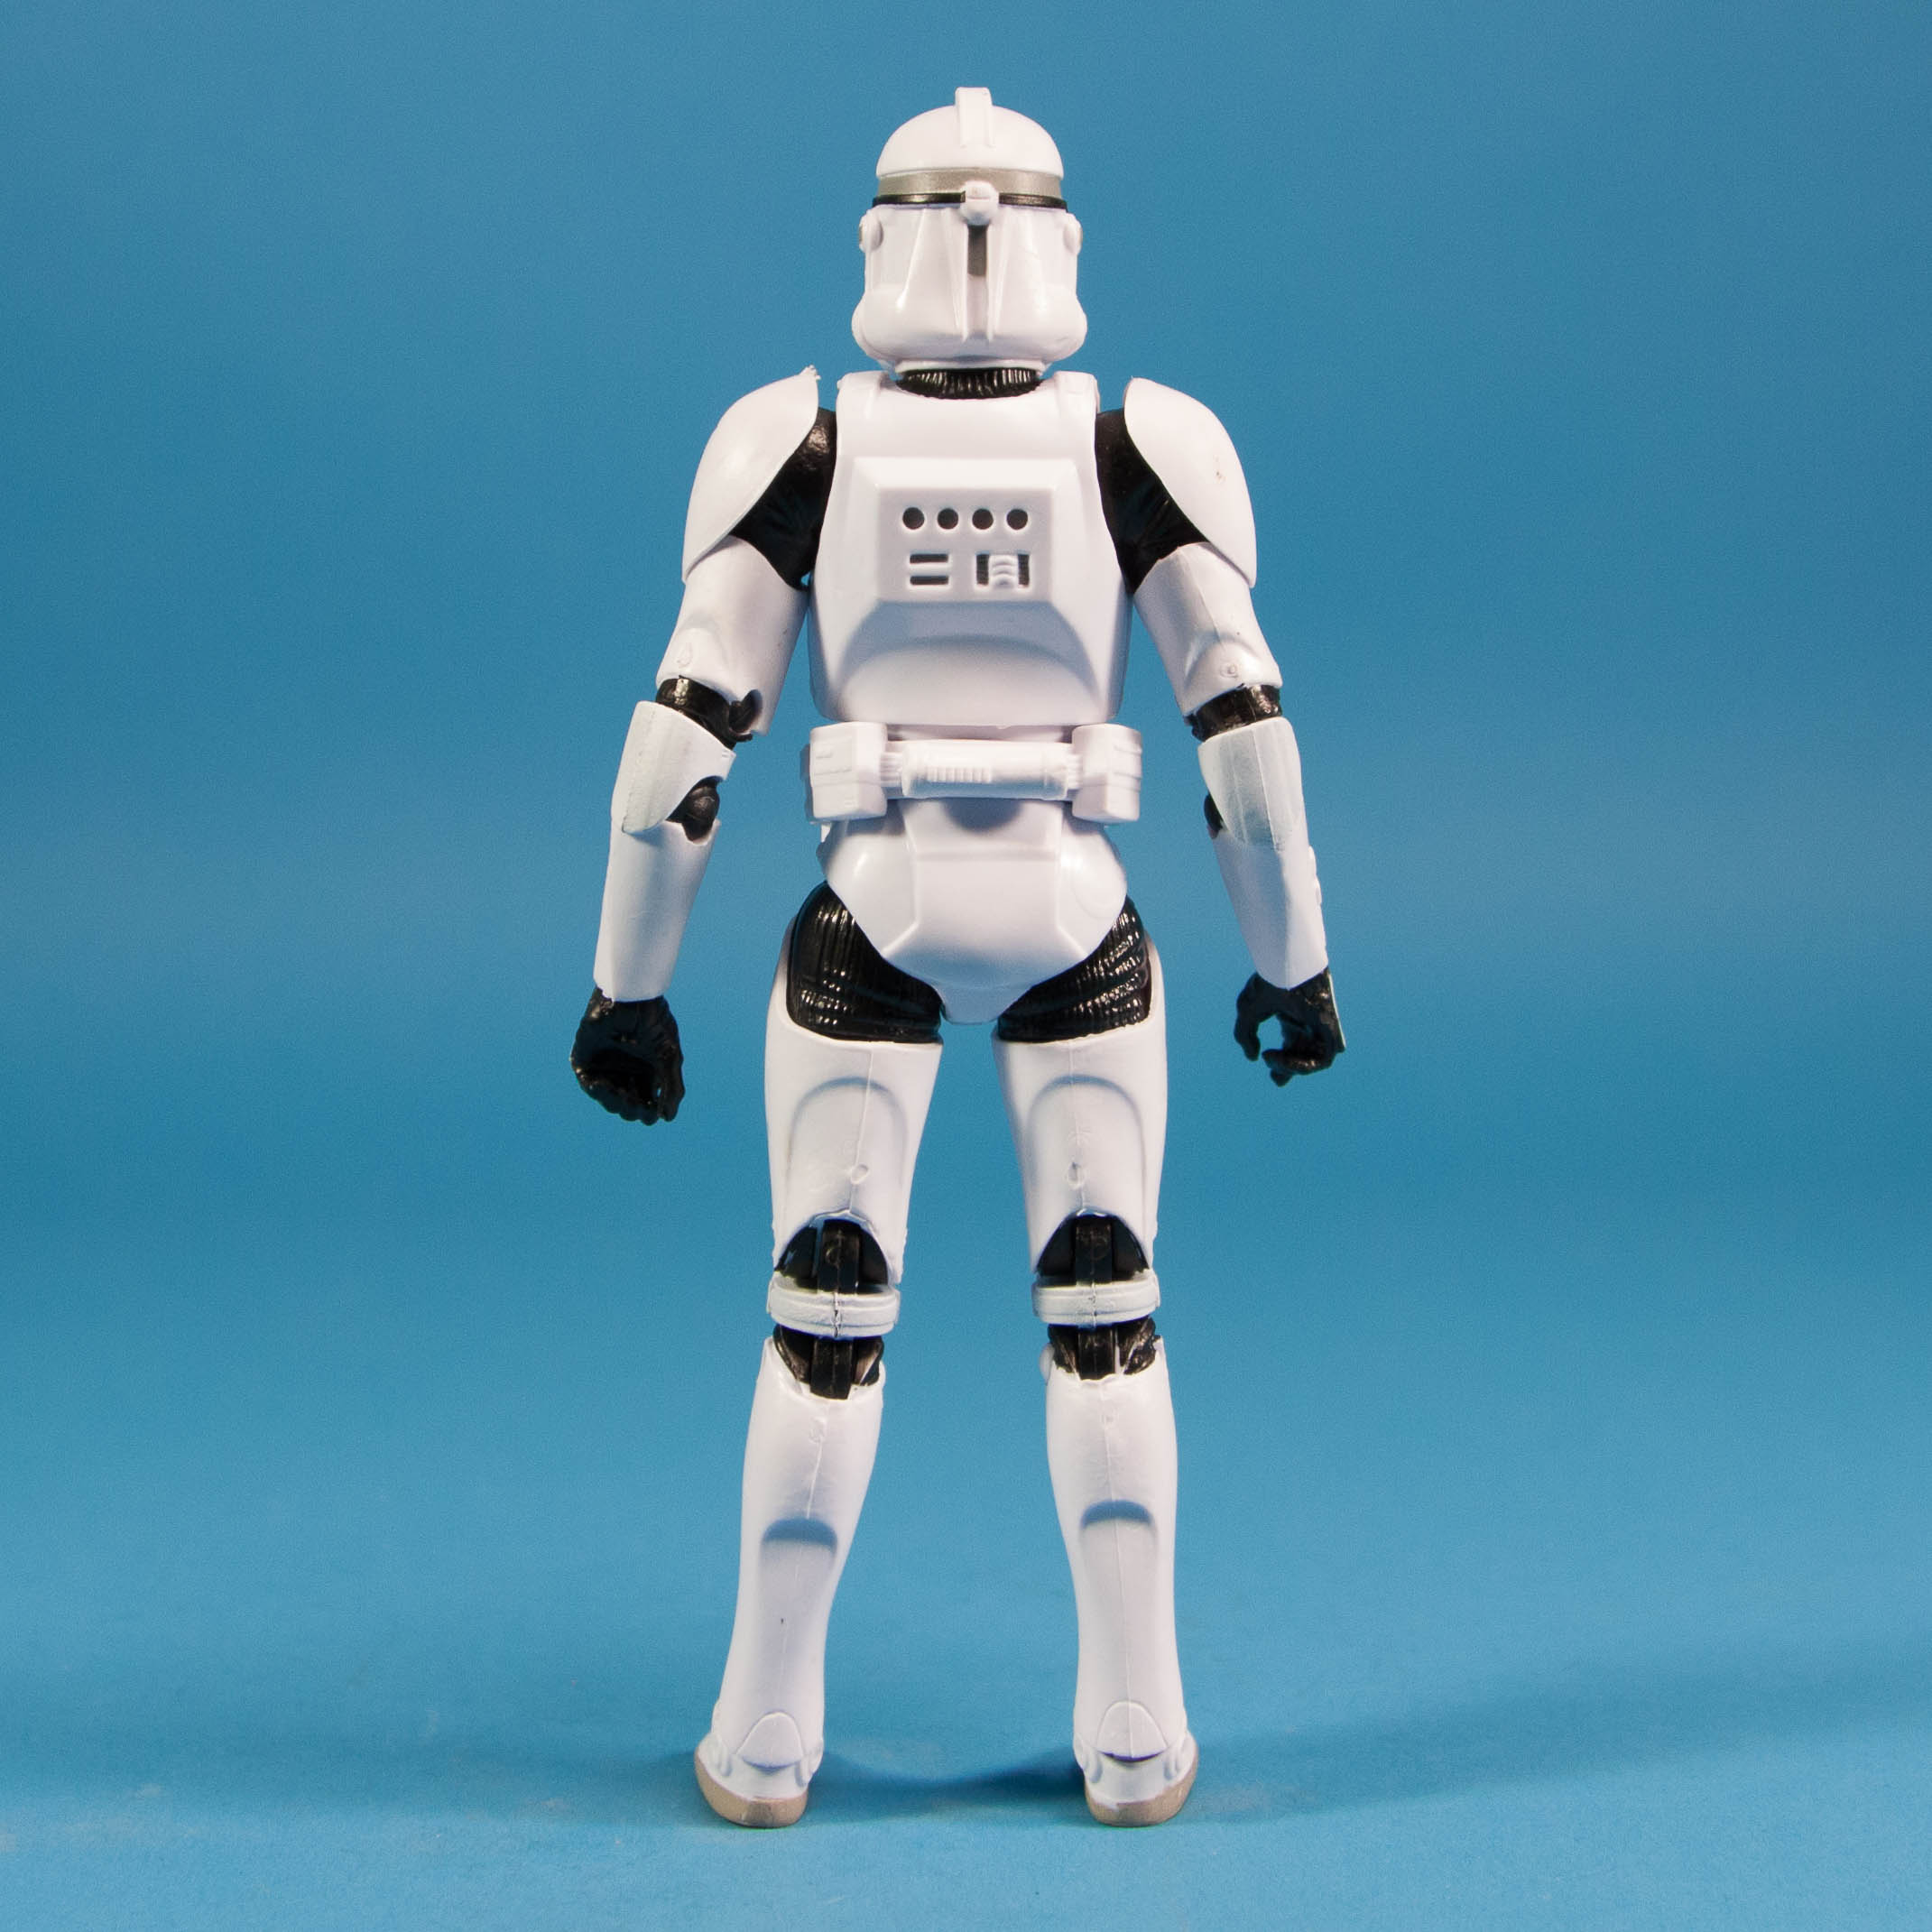 stormtrooper-collection-6-inch-4-pack-amazon-exclusive-015.jpg